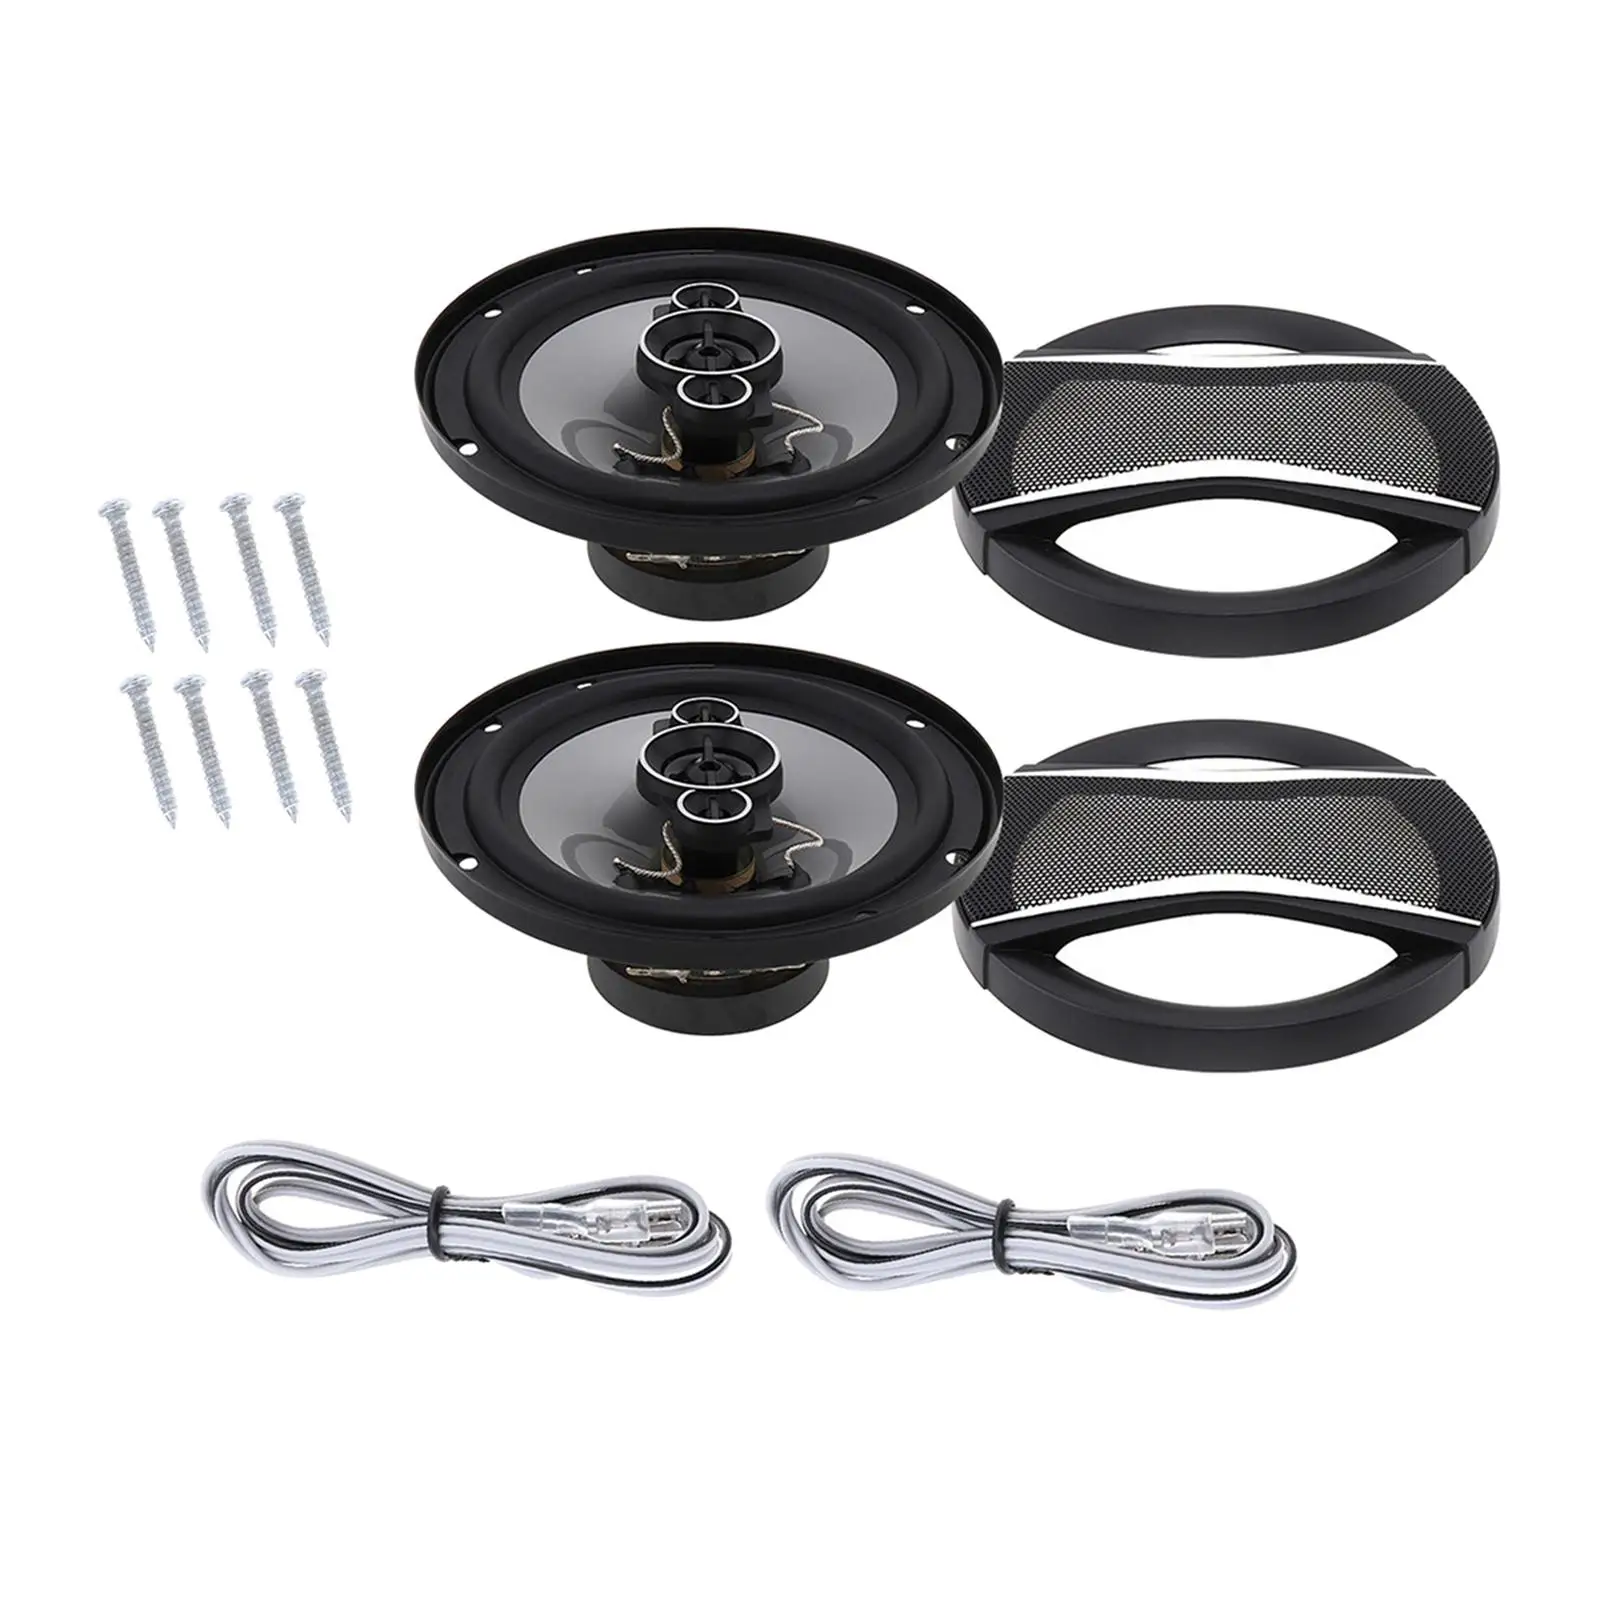 2x 6.5 inch 12V Coaxial Speakers Easy to Install Non-Destructive Installation Car Speakers